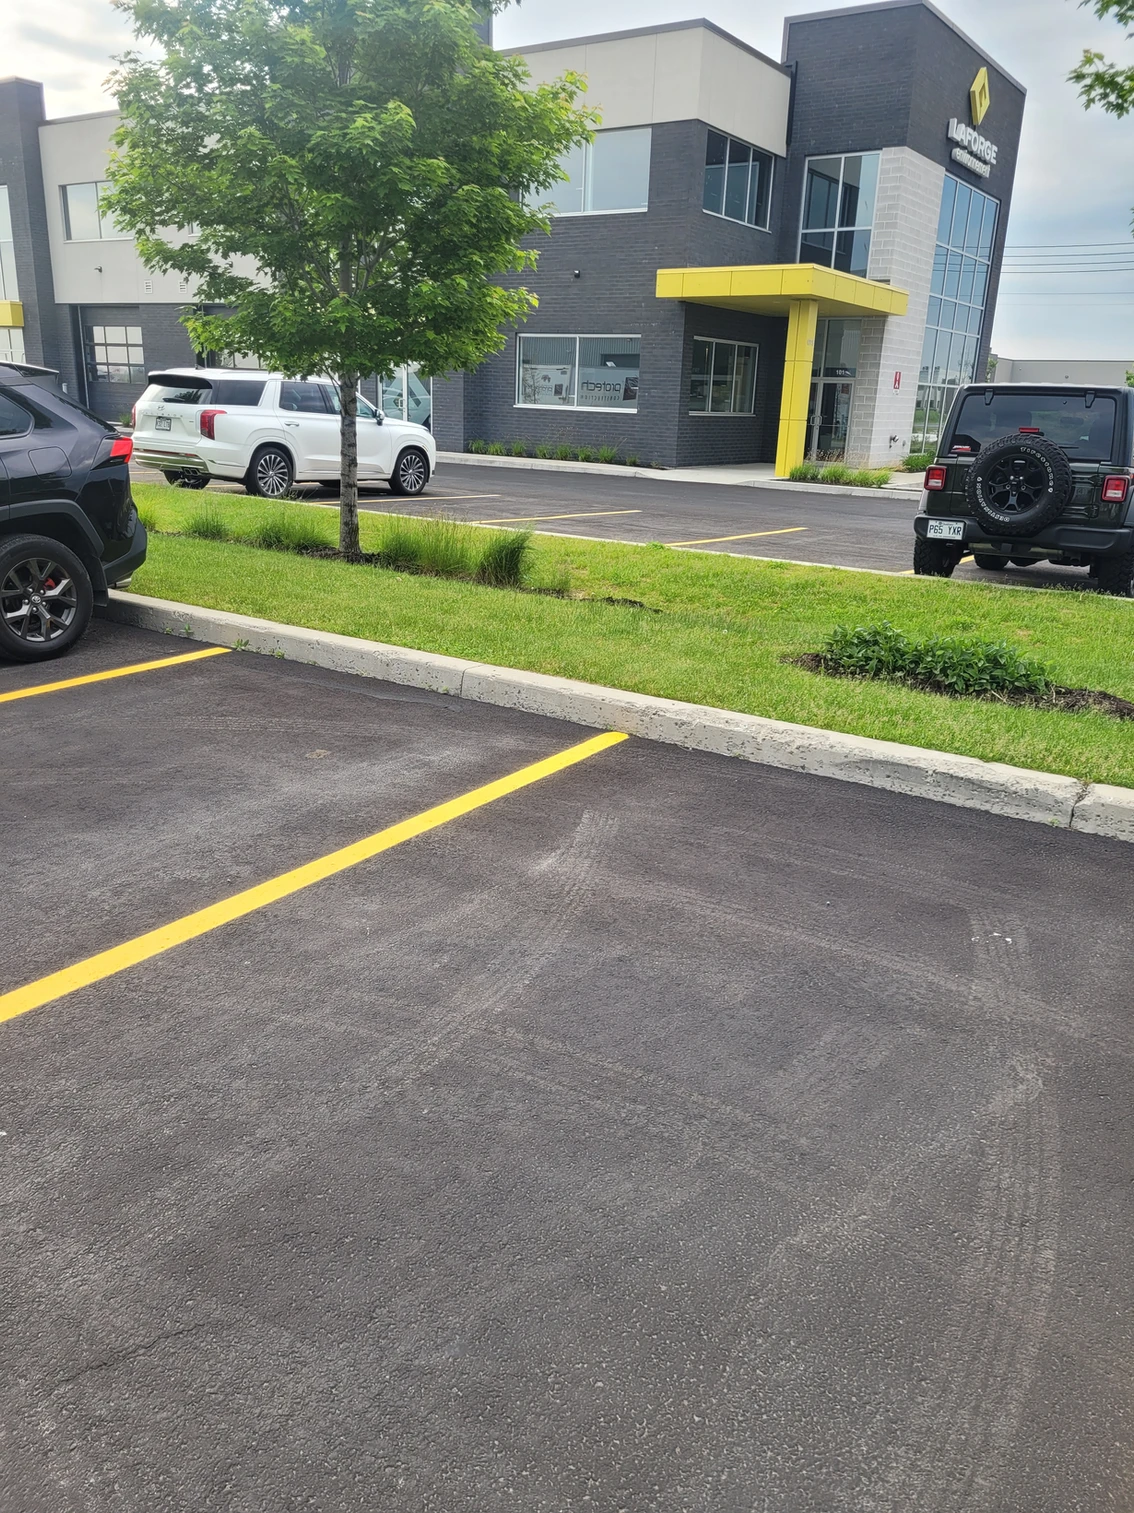 A concrete curb parking lot outside one of our construction transformations.